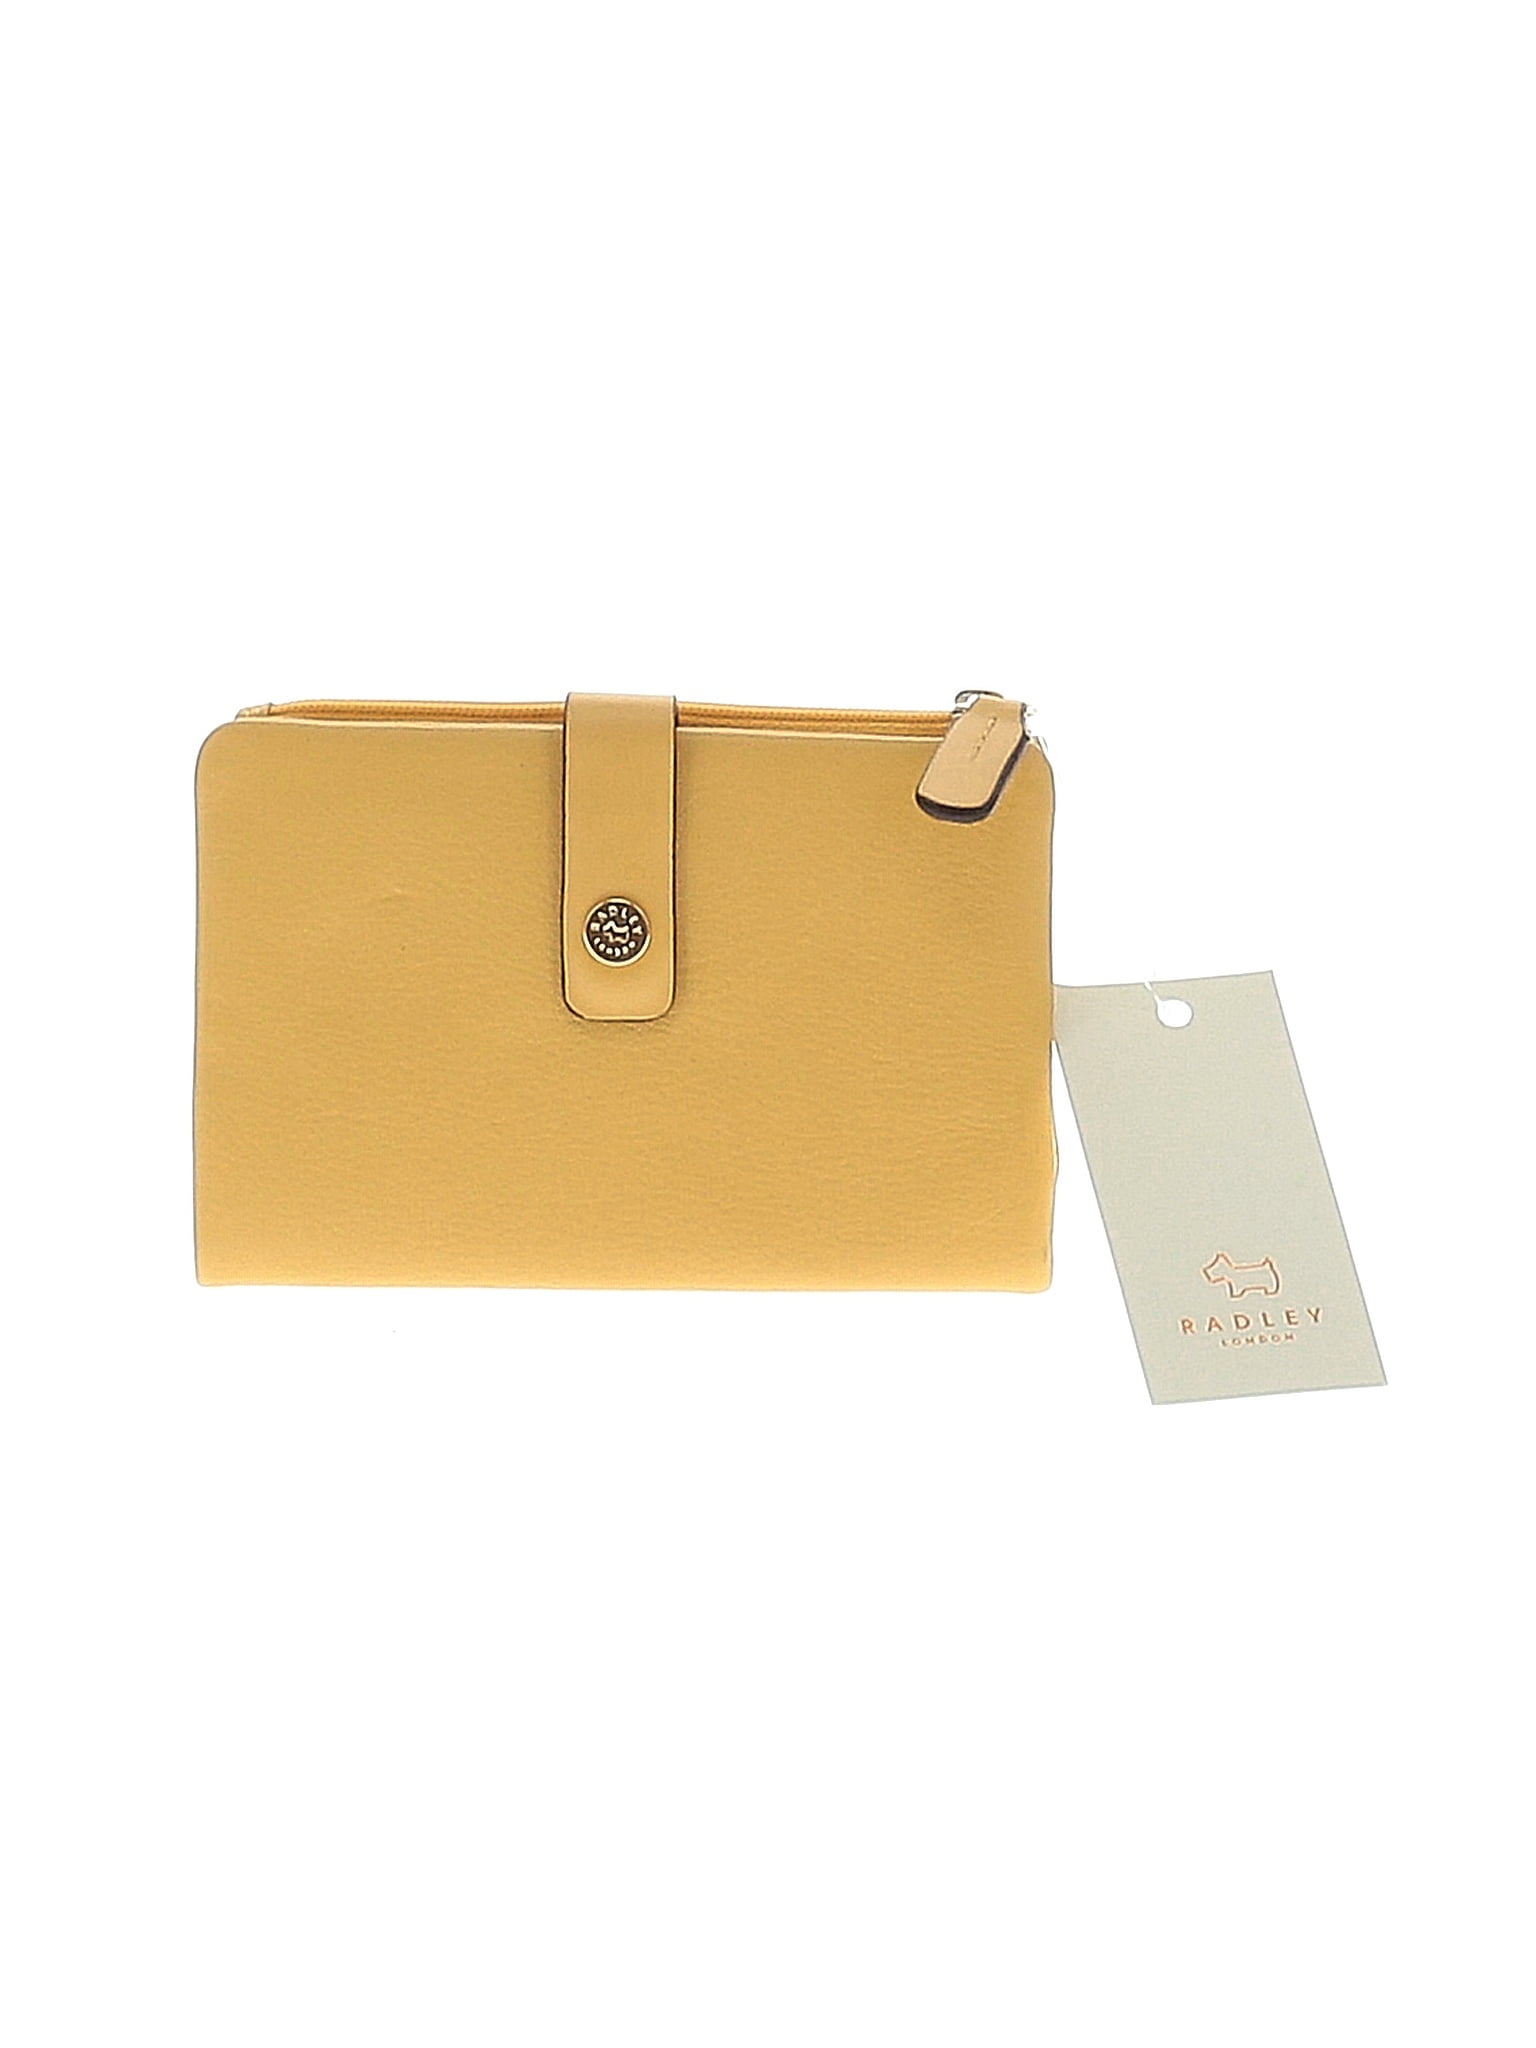 Radley London 100% Leather Solid Yellow Leather Wallet One Size - 64% off